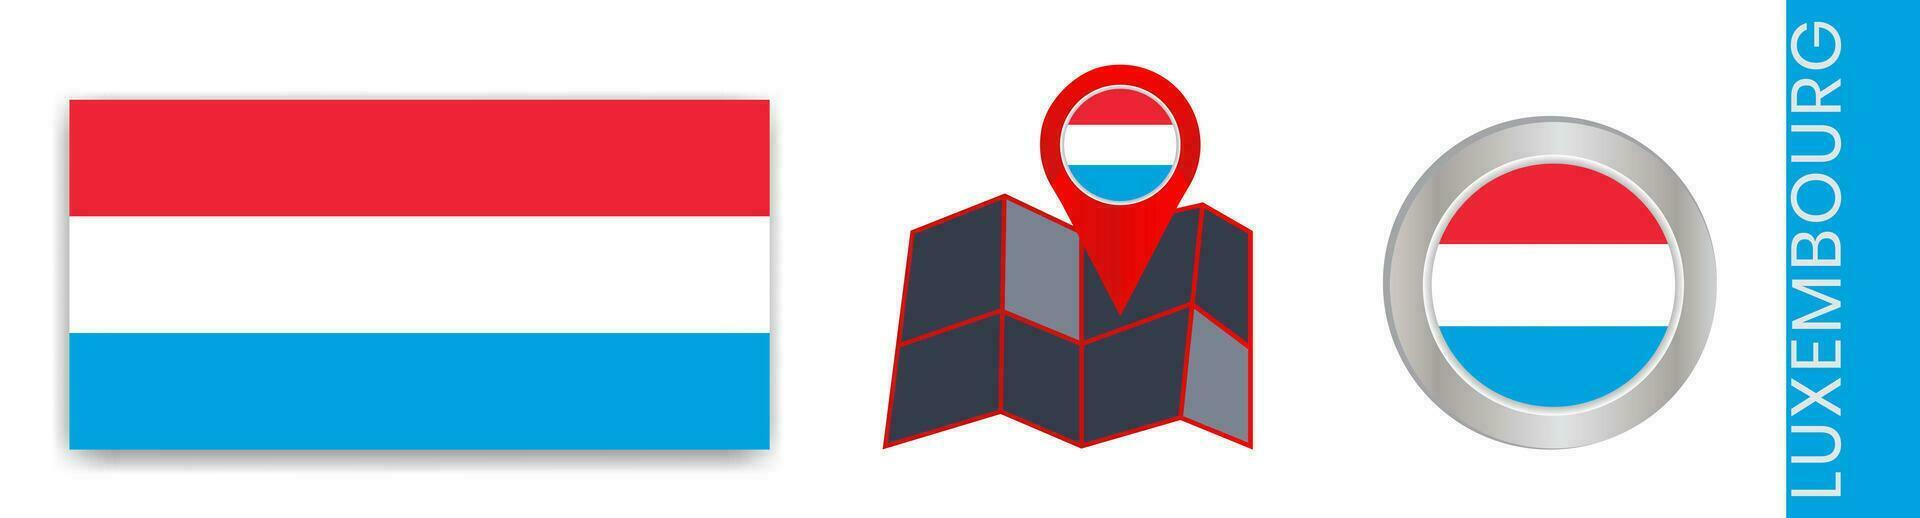 Collection of Luxembourg's national flags isolated in official colors and map icons of Luxembourg with country flags. vector